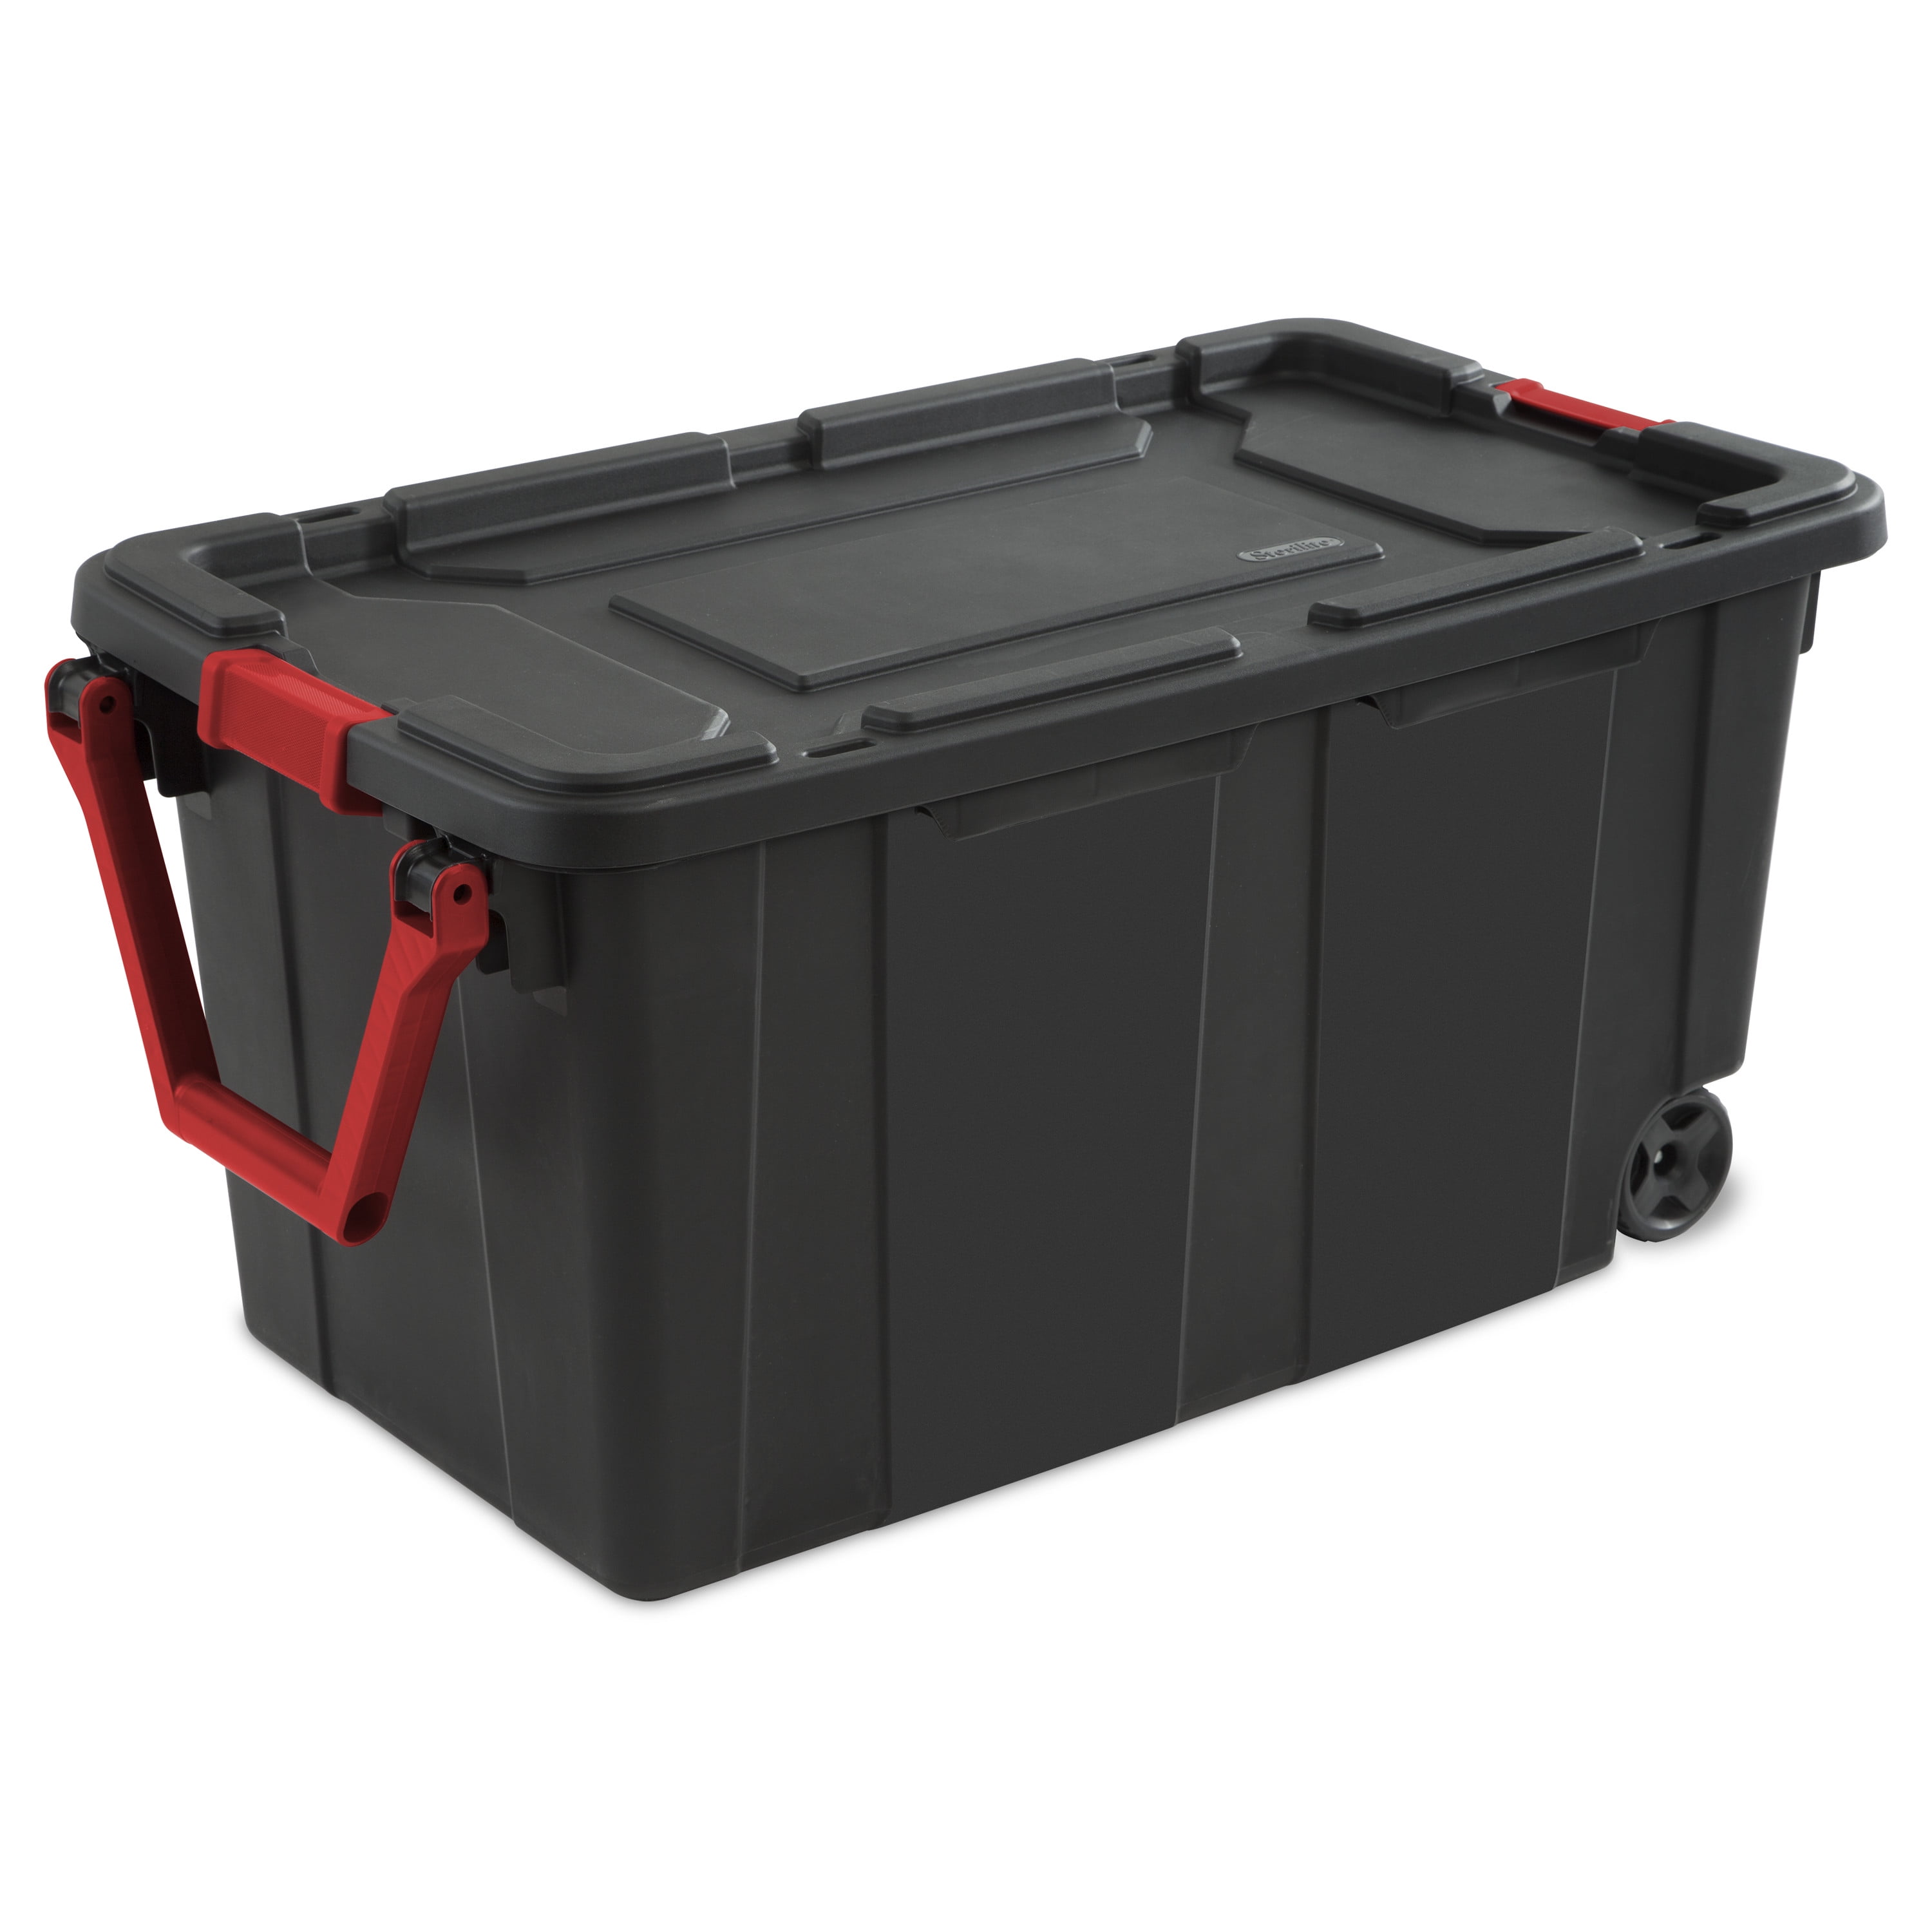 Sterilite 160 Qt Latching Stackable Wheeled Storage Box Container w/ Lid, 8  Pack